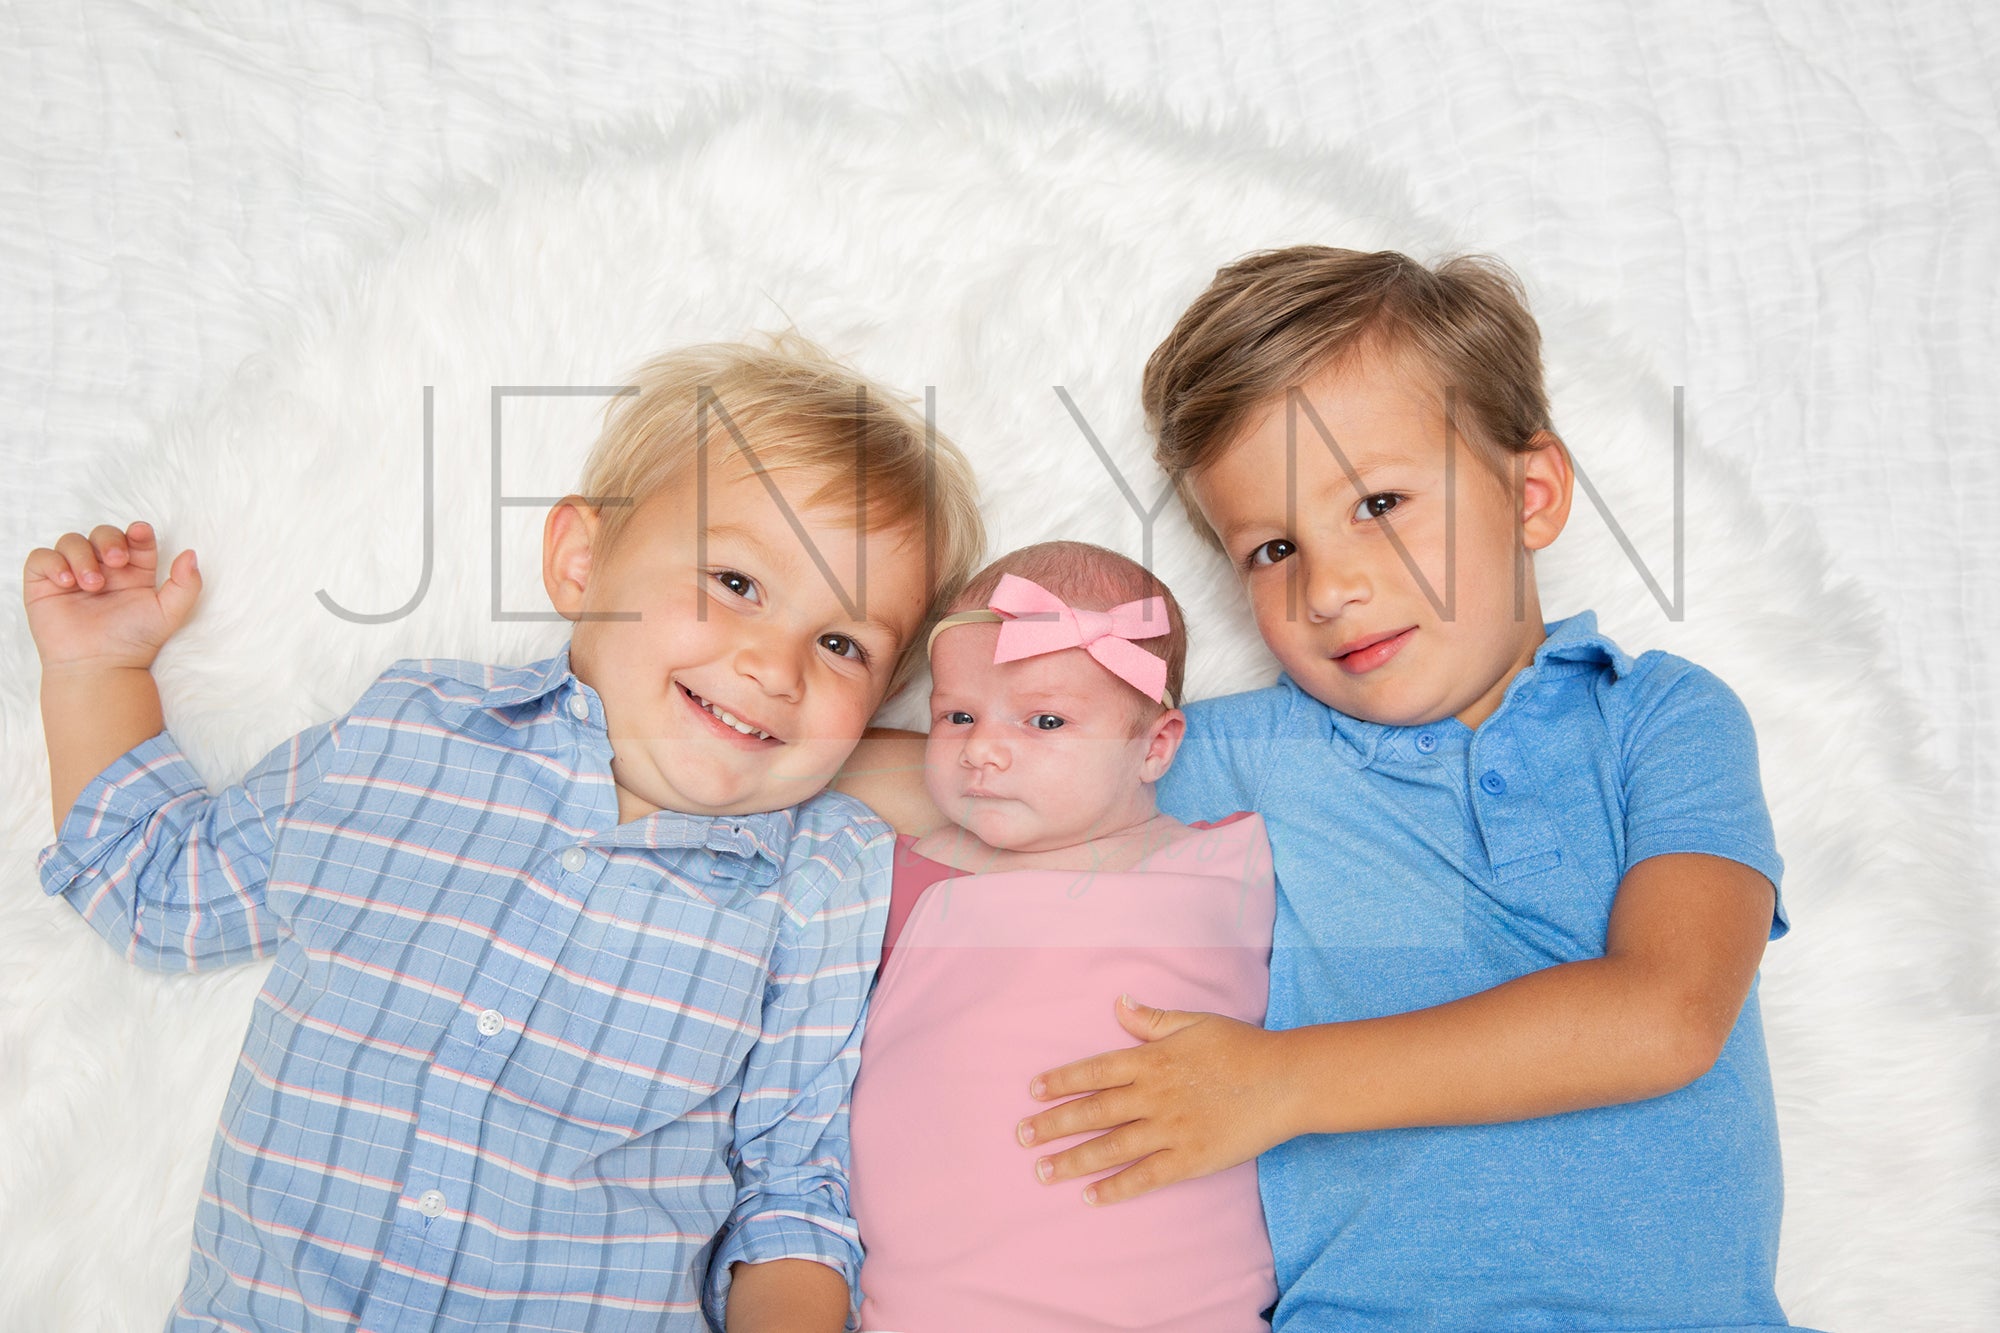 Jersey Baby Girl with Brothers Blanket Mockup #10 PSD